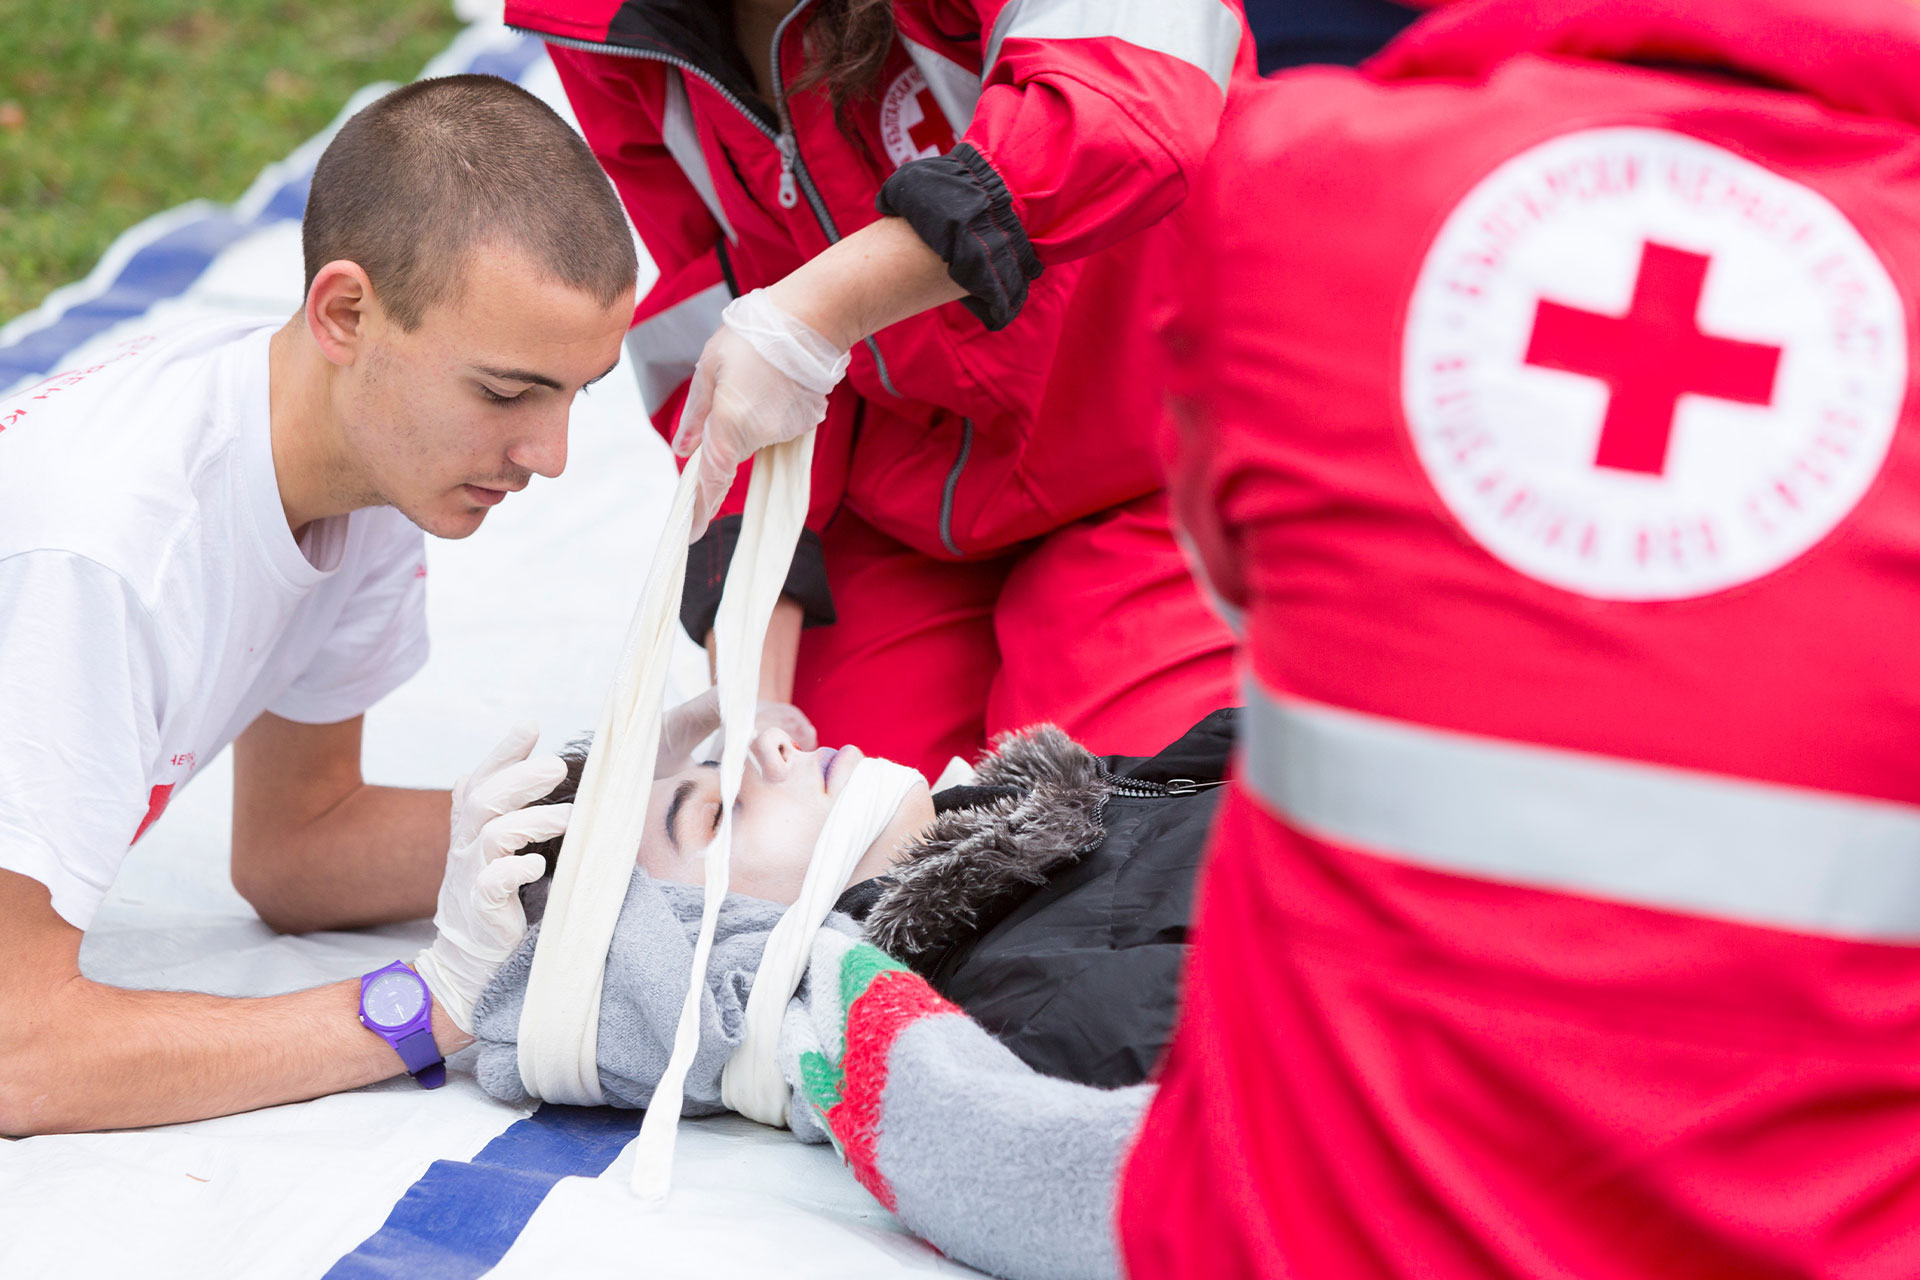 red cross volunteers helping some one | photo by: ©cylonphoto/123RF.COM